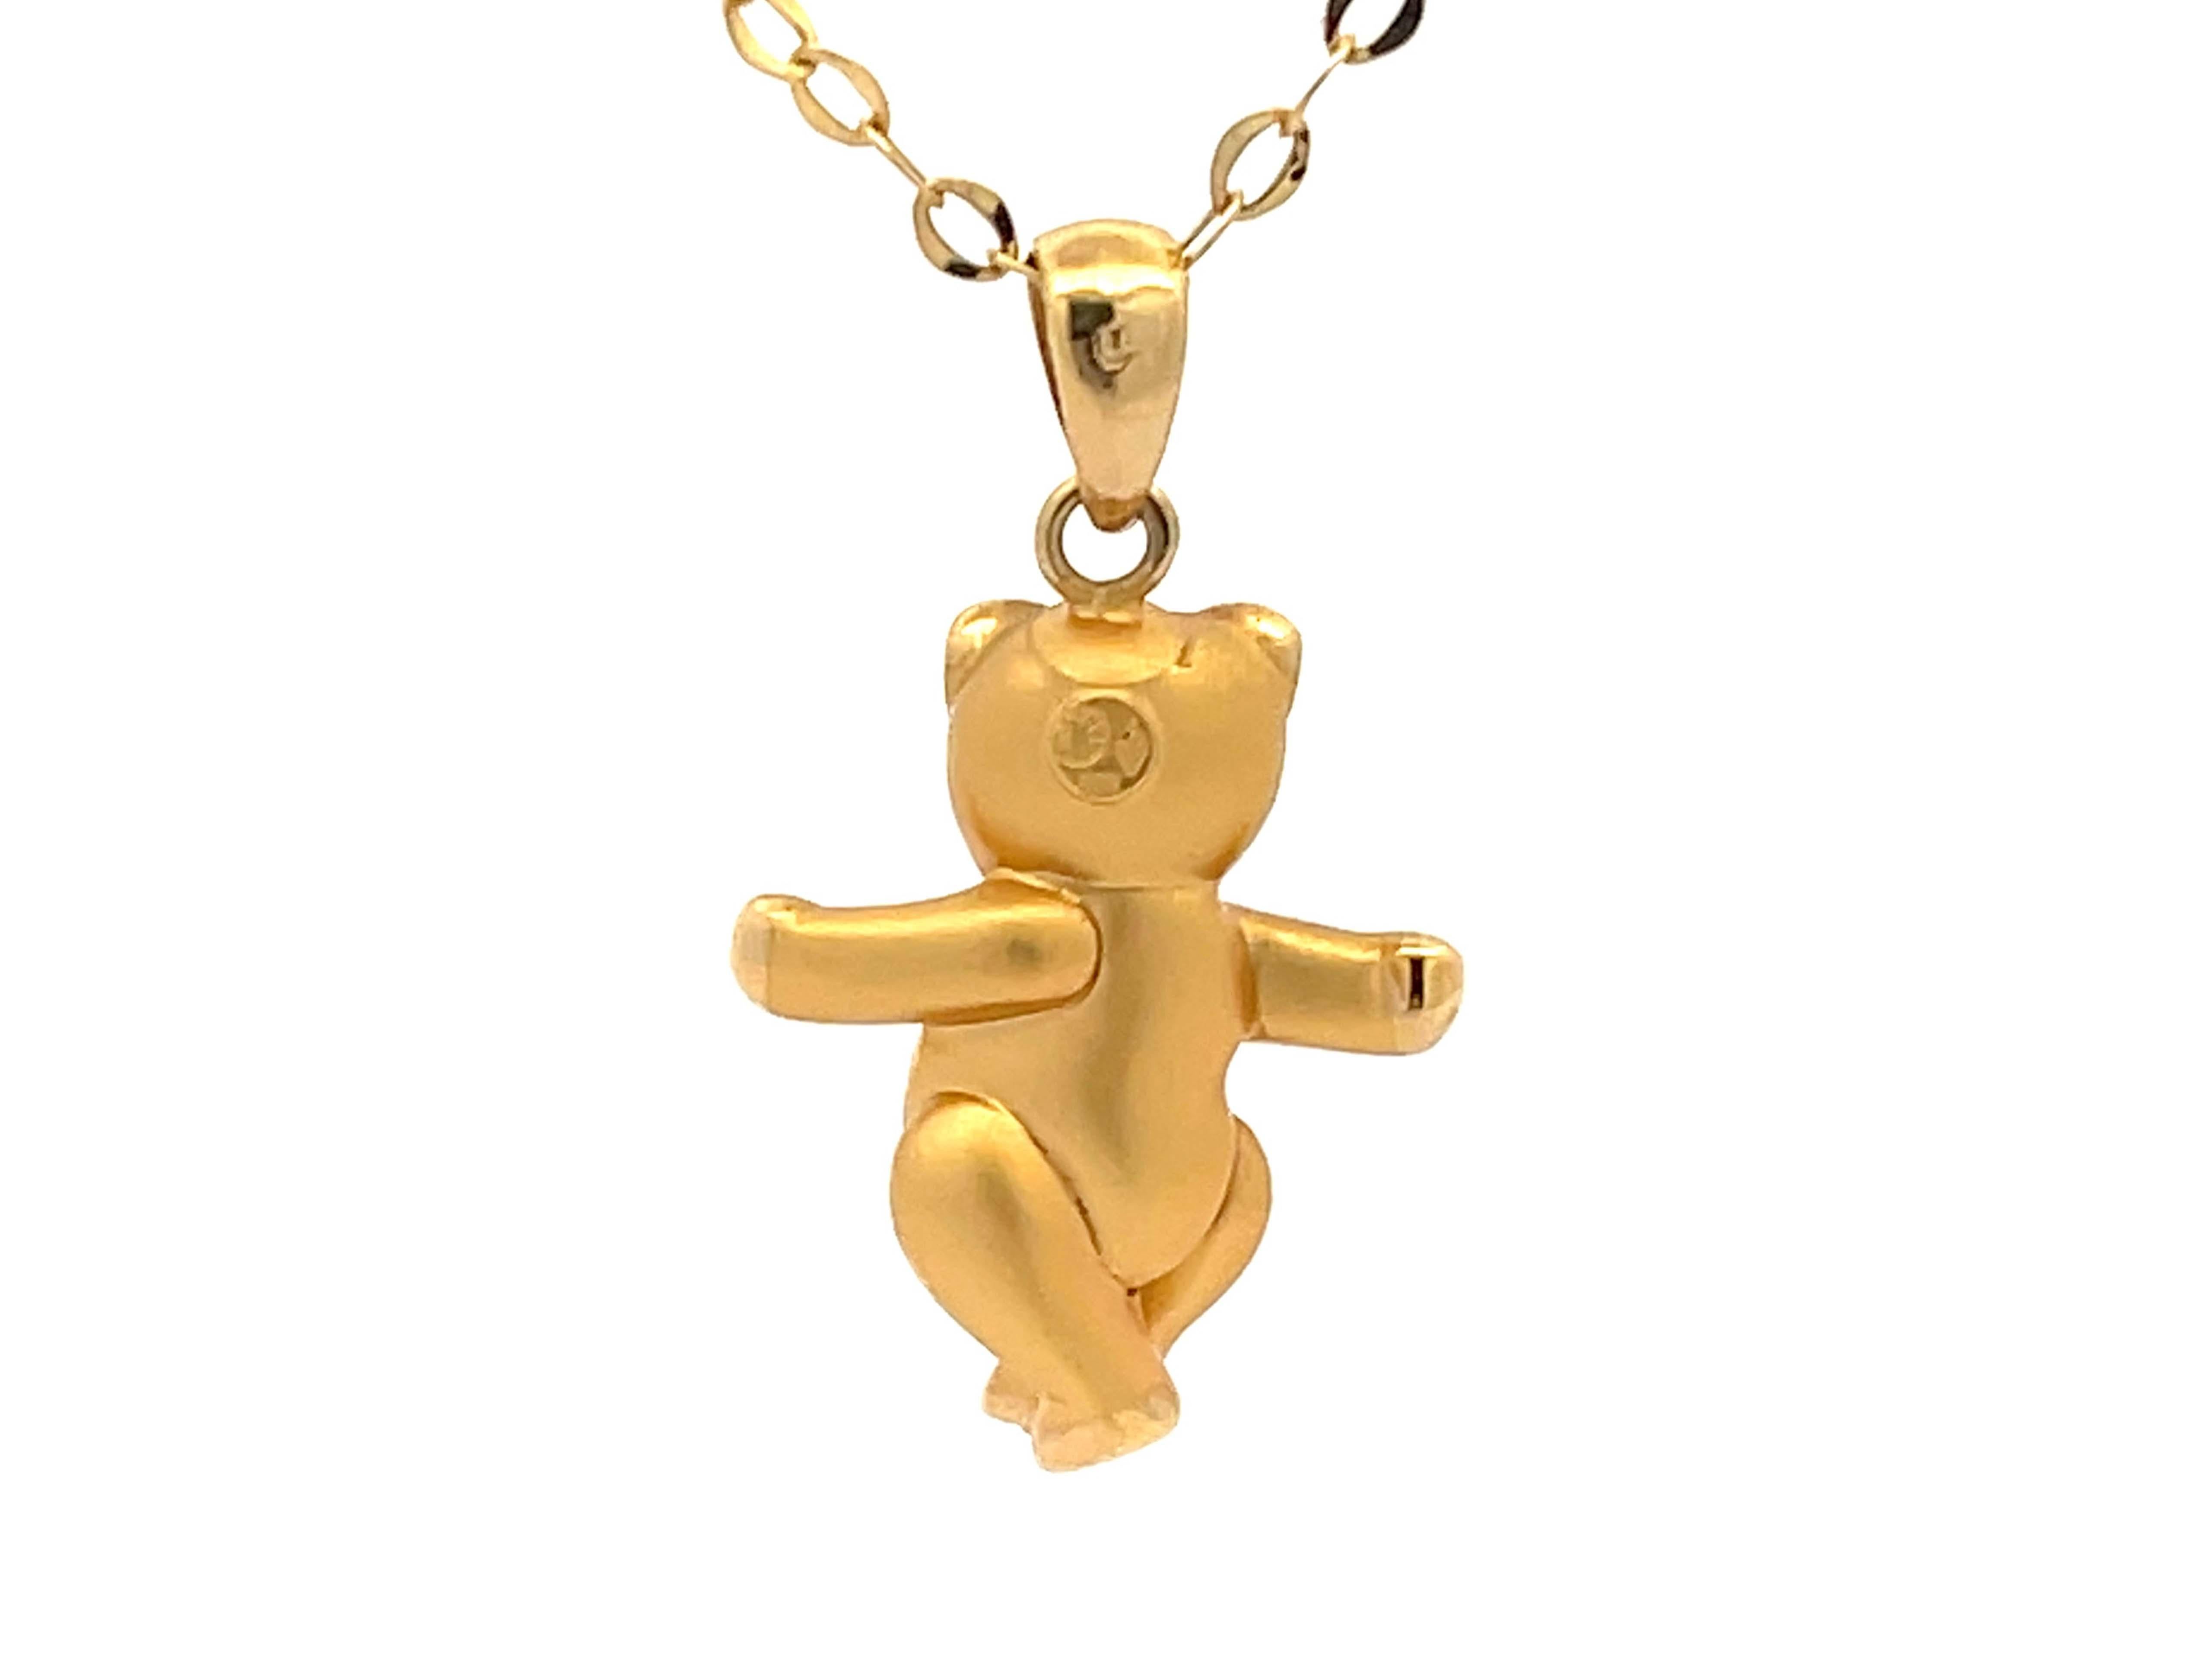 Modern French Designer Teddy Bear Necklace in 18k Yellow Gold For Sale